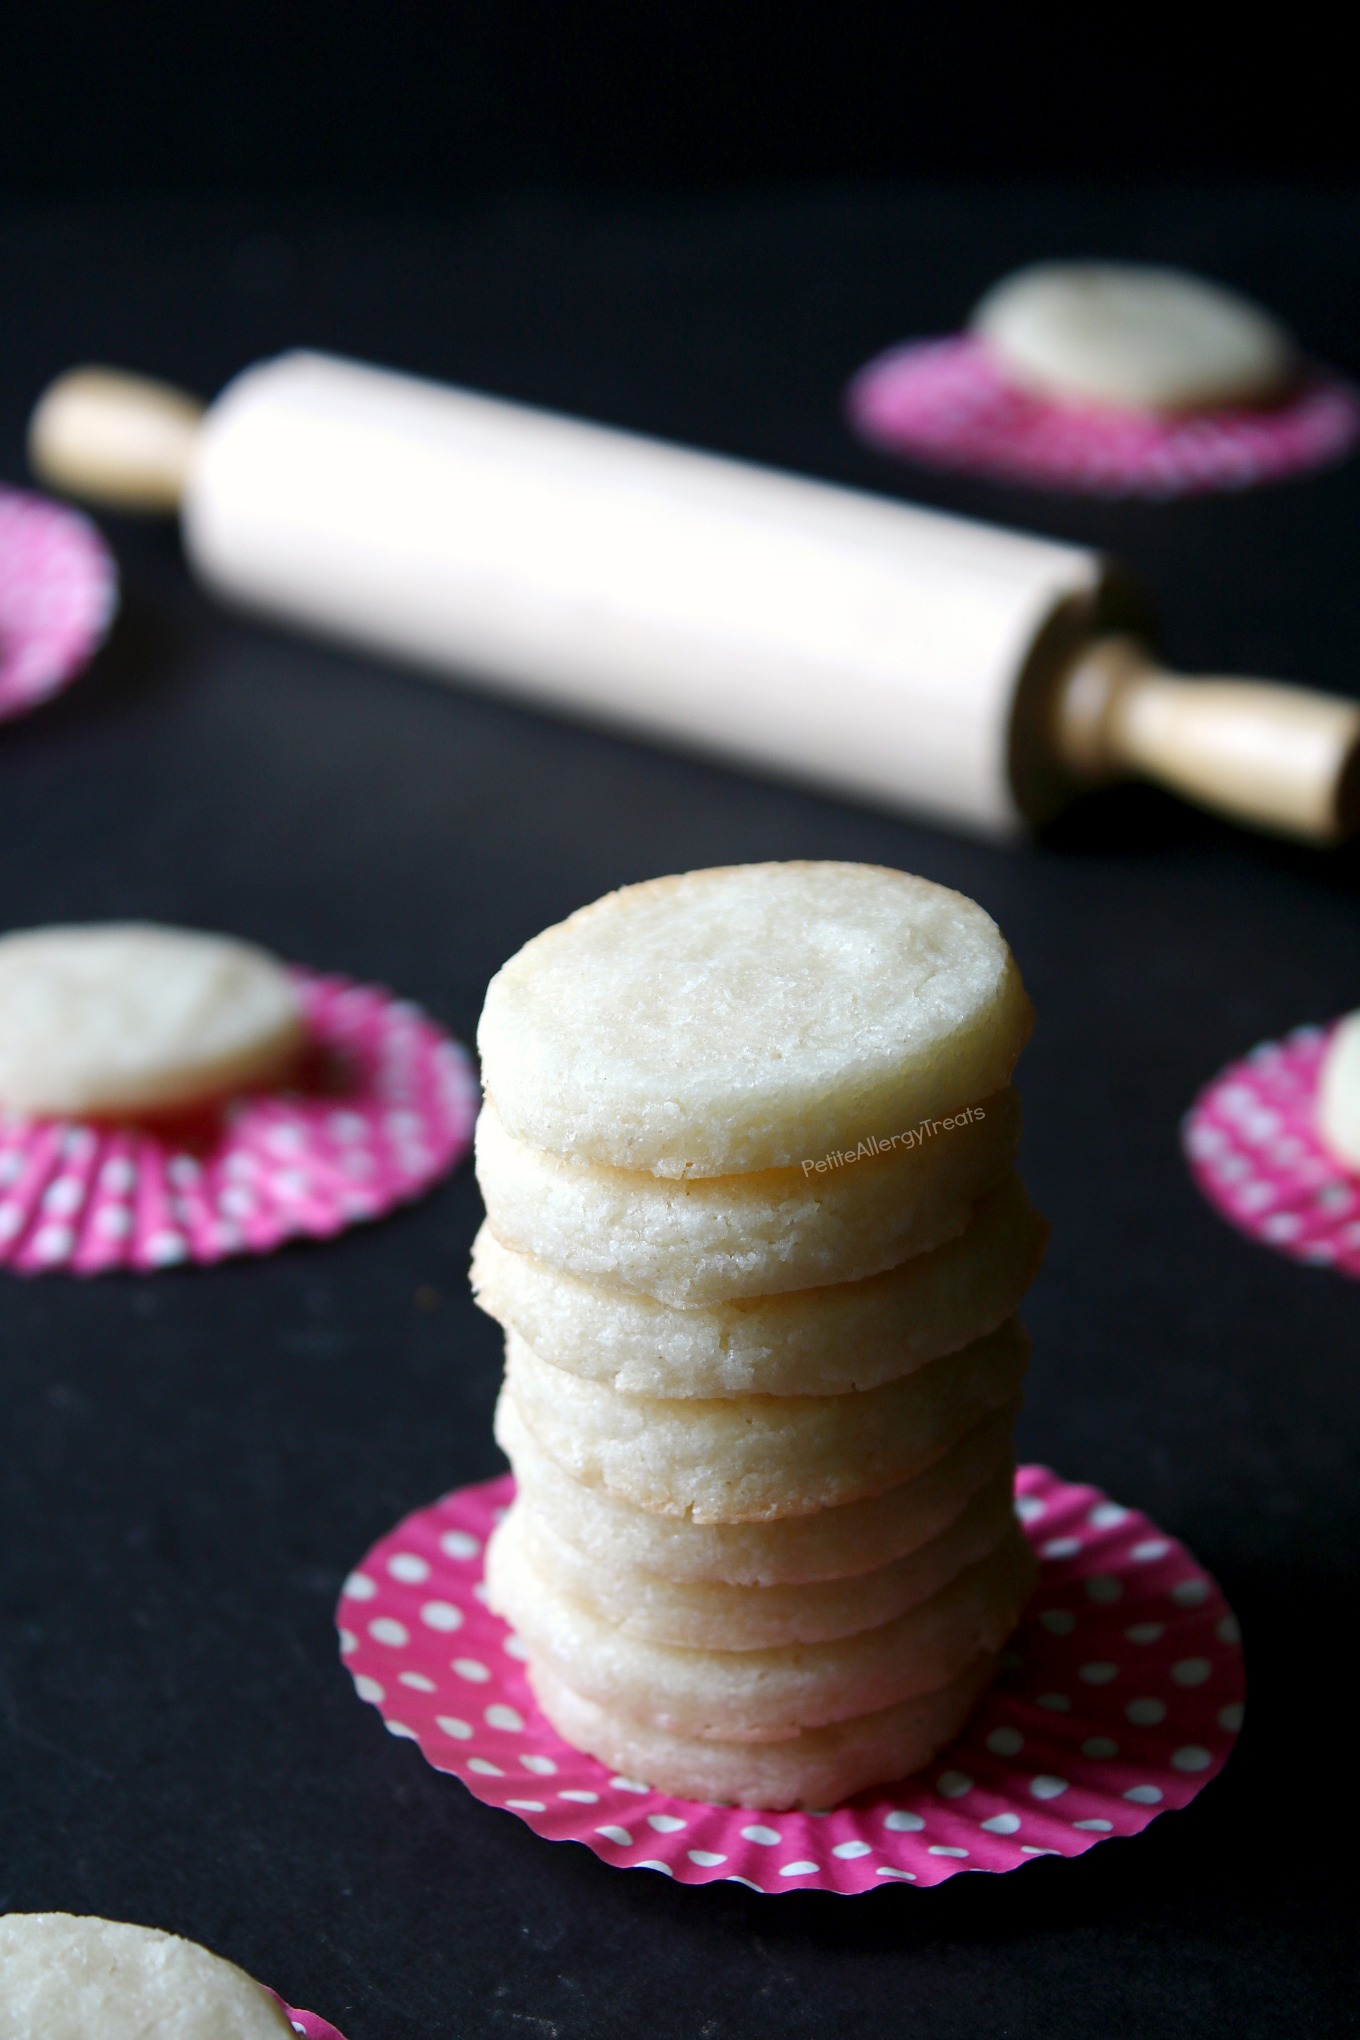 Best Gluten Free Vegan Sugar Cookies Recipe w/ egg free Royal Icing (vegan dairy free egg free)- Easy roll out sugar cookies! Perfect for Christmas. Food Allergy friendly.